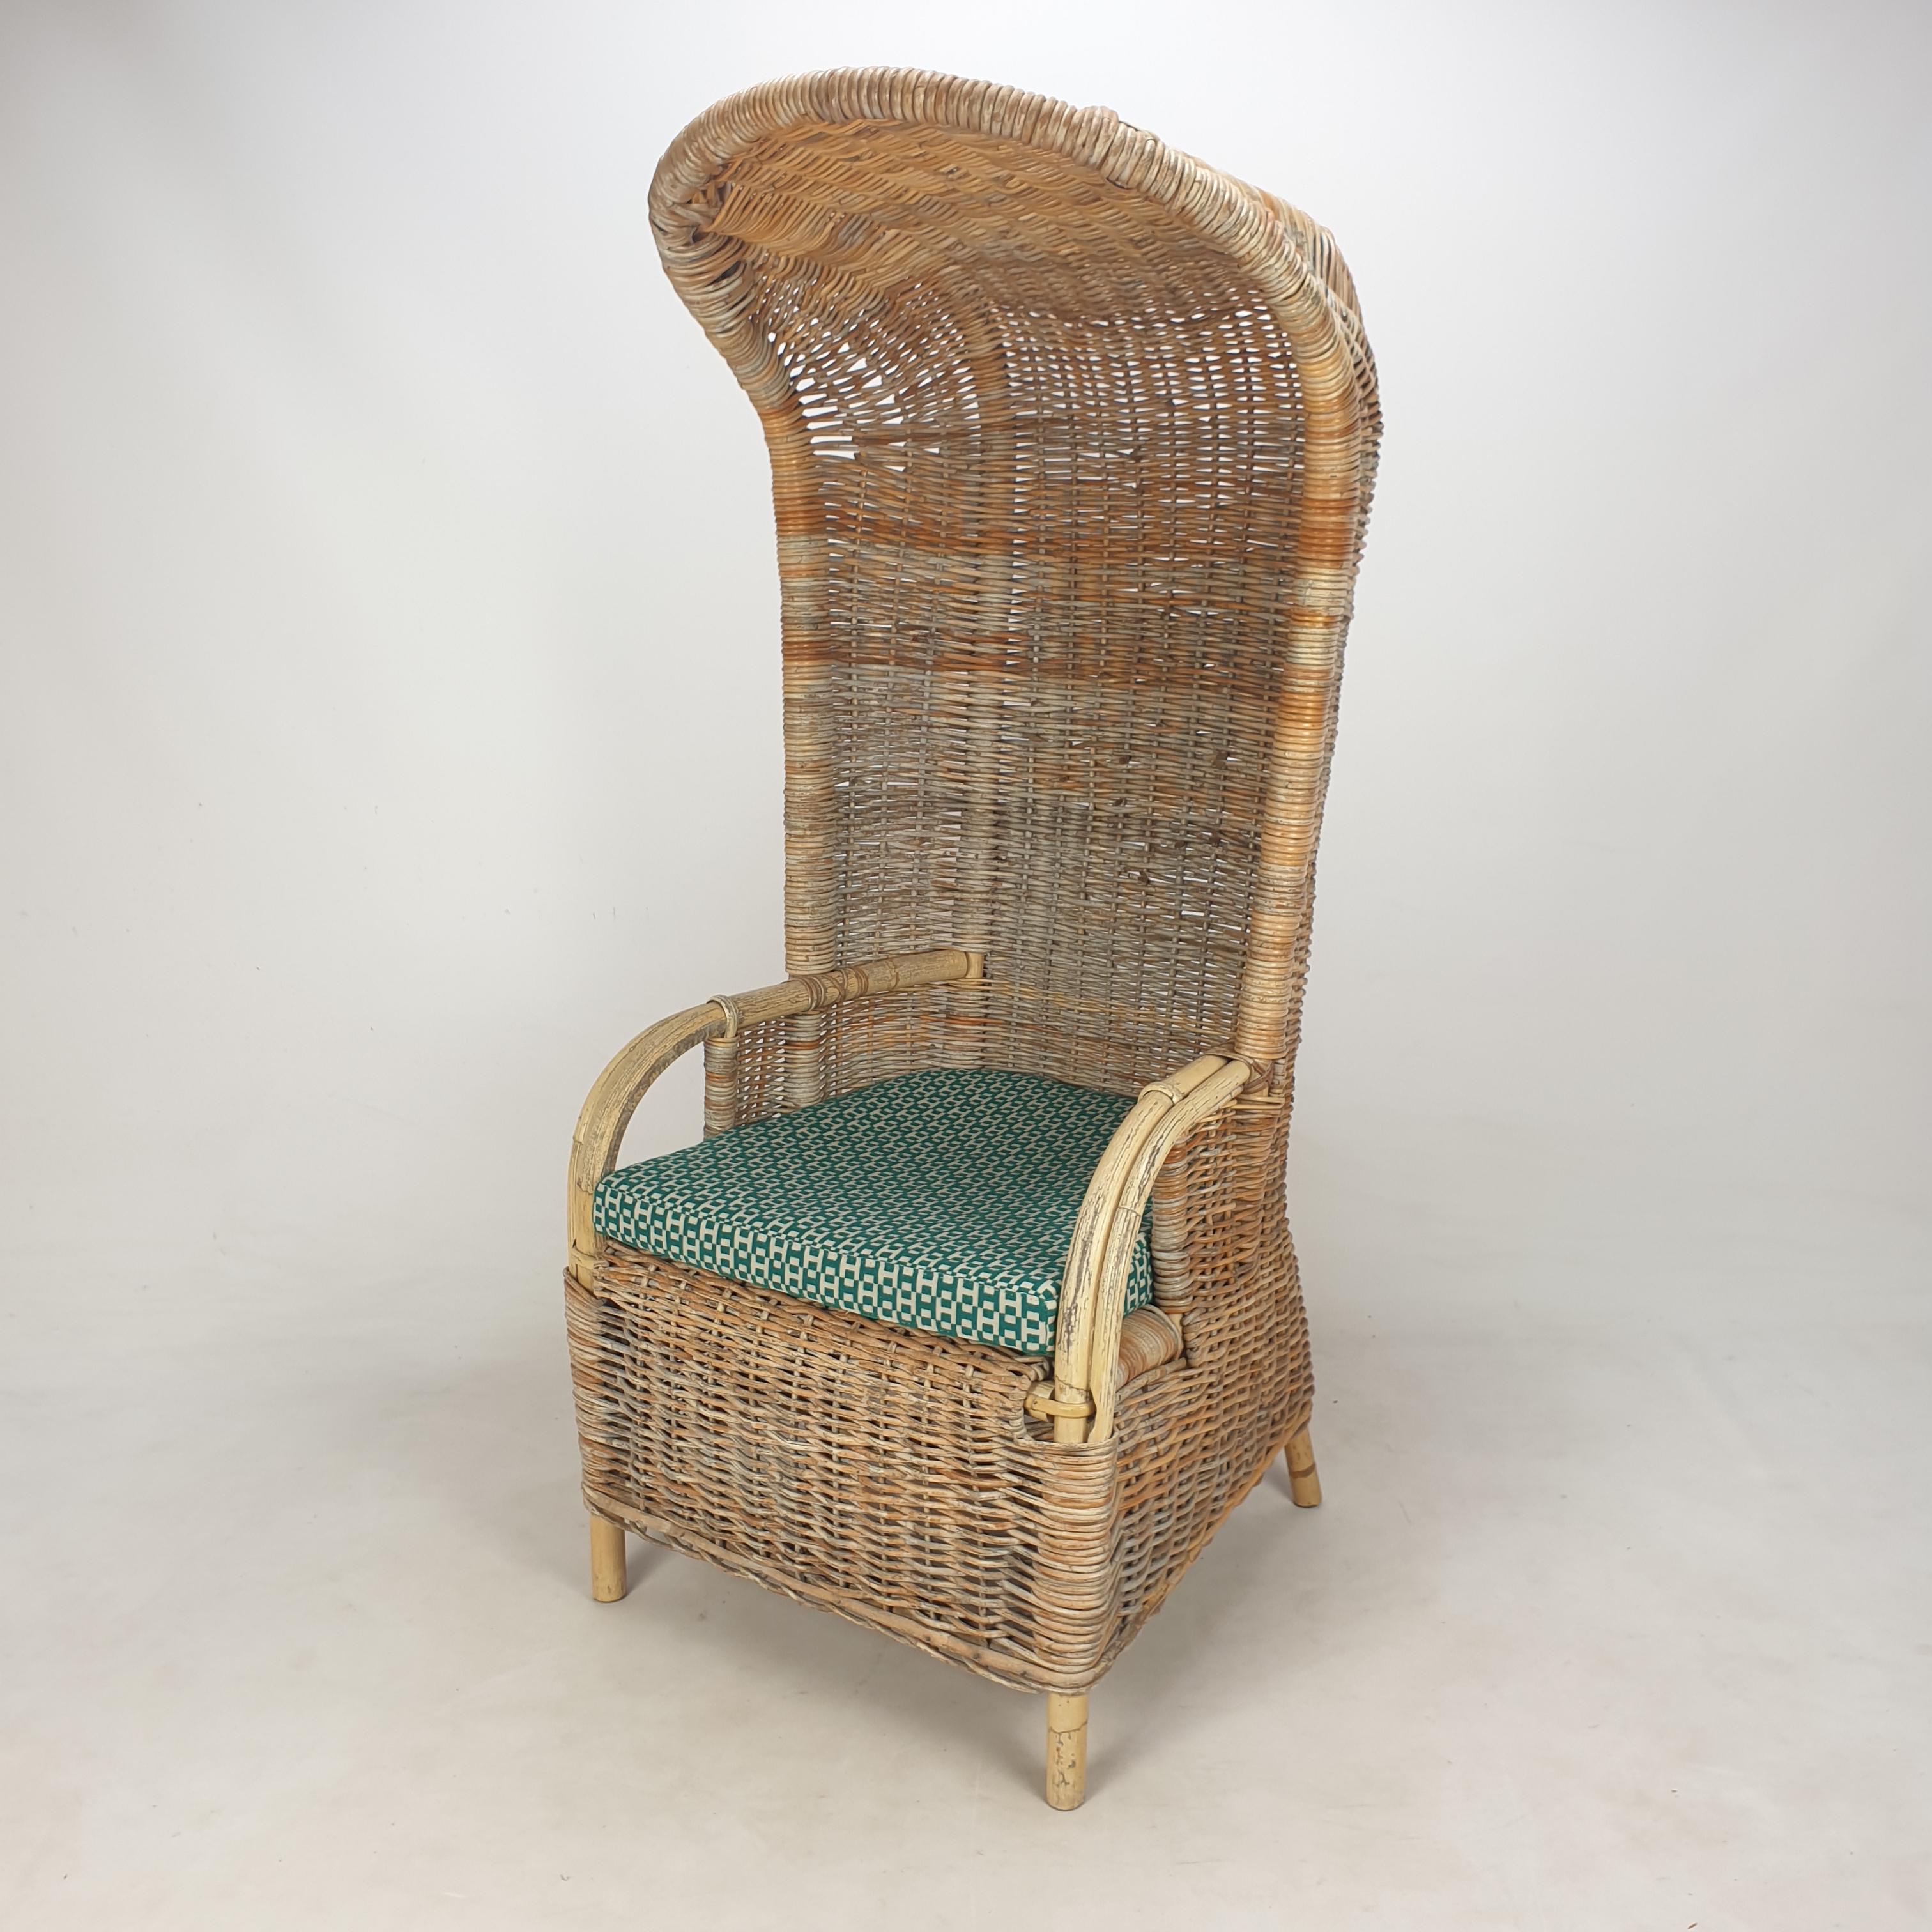 Very nice beach or pool chair, made in Italy in the 70's.
It has a comfortable cushion upholstered with stunning Dedar Hermés fabric.
The chair is made of rattan. 

It gives protection from the sun and it is shaped to give comfort to your back.